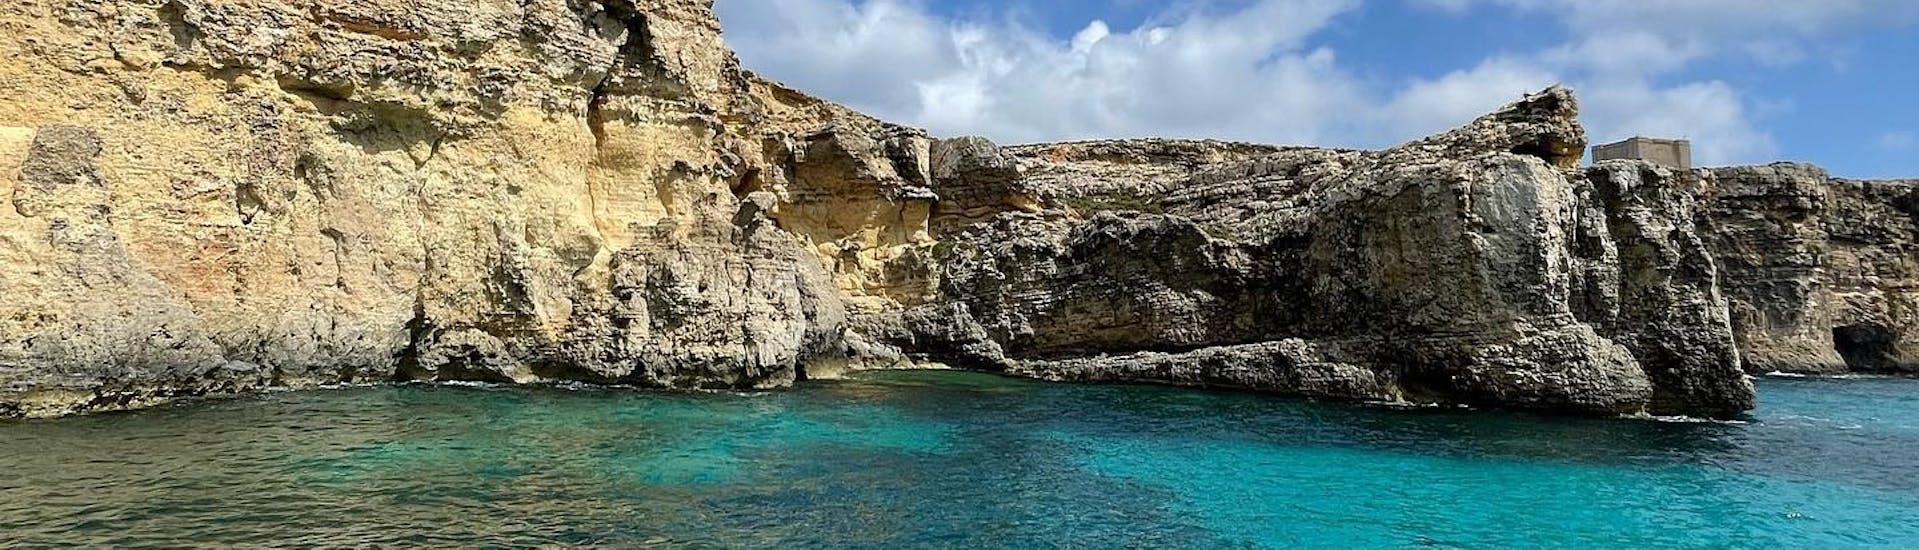 The rocky formations viewed from the boat during the Boat Trip to Comino with Snorkeling & Swimming at the Blue Lagoon with Oh Yeah Malta.